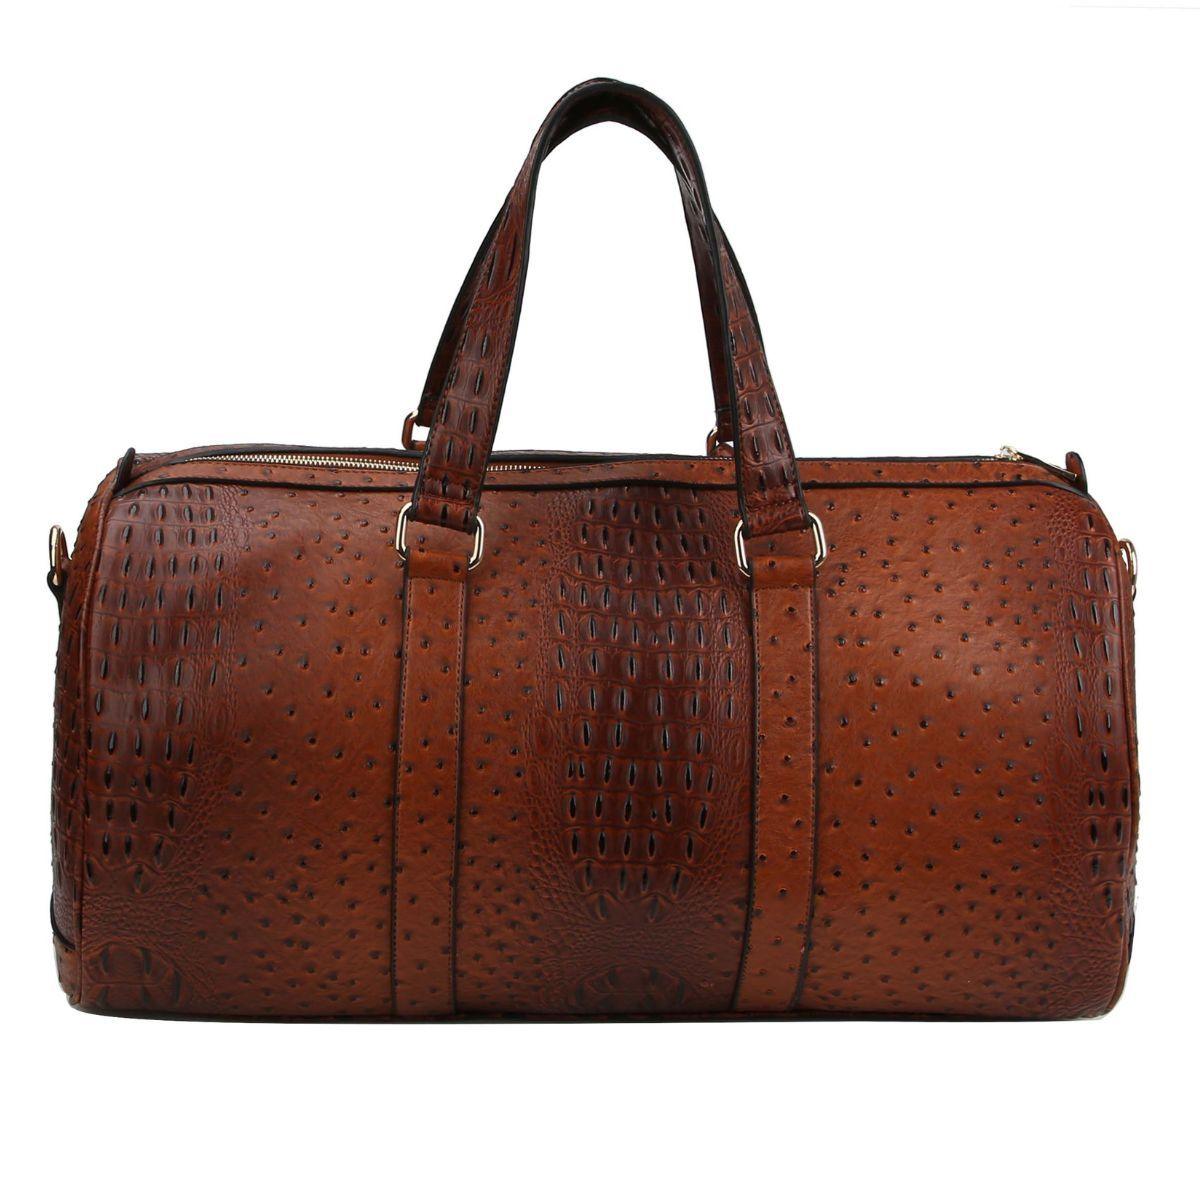 Make a Fashion Statement with Women's Brown Duffle Bag Set